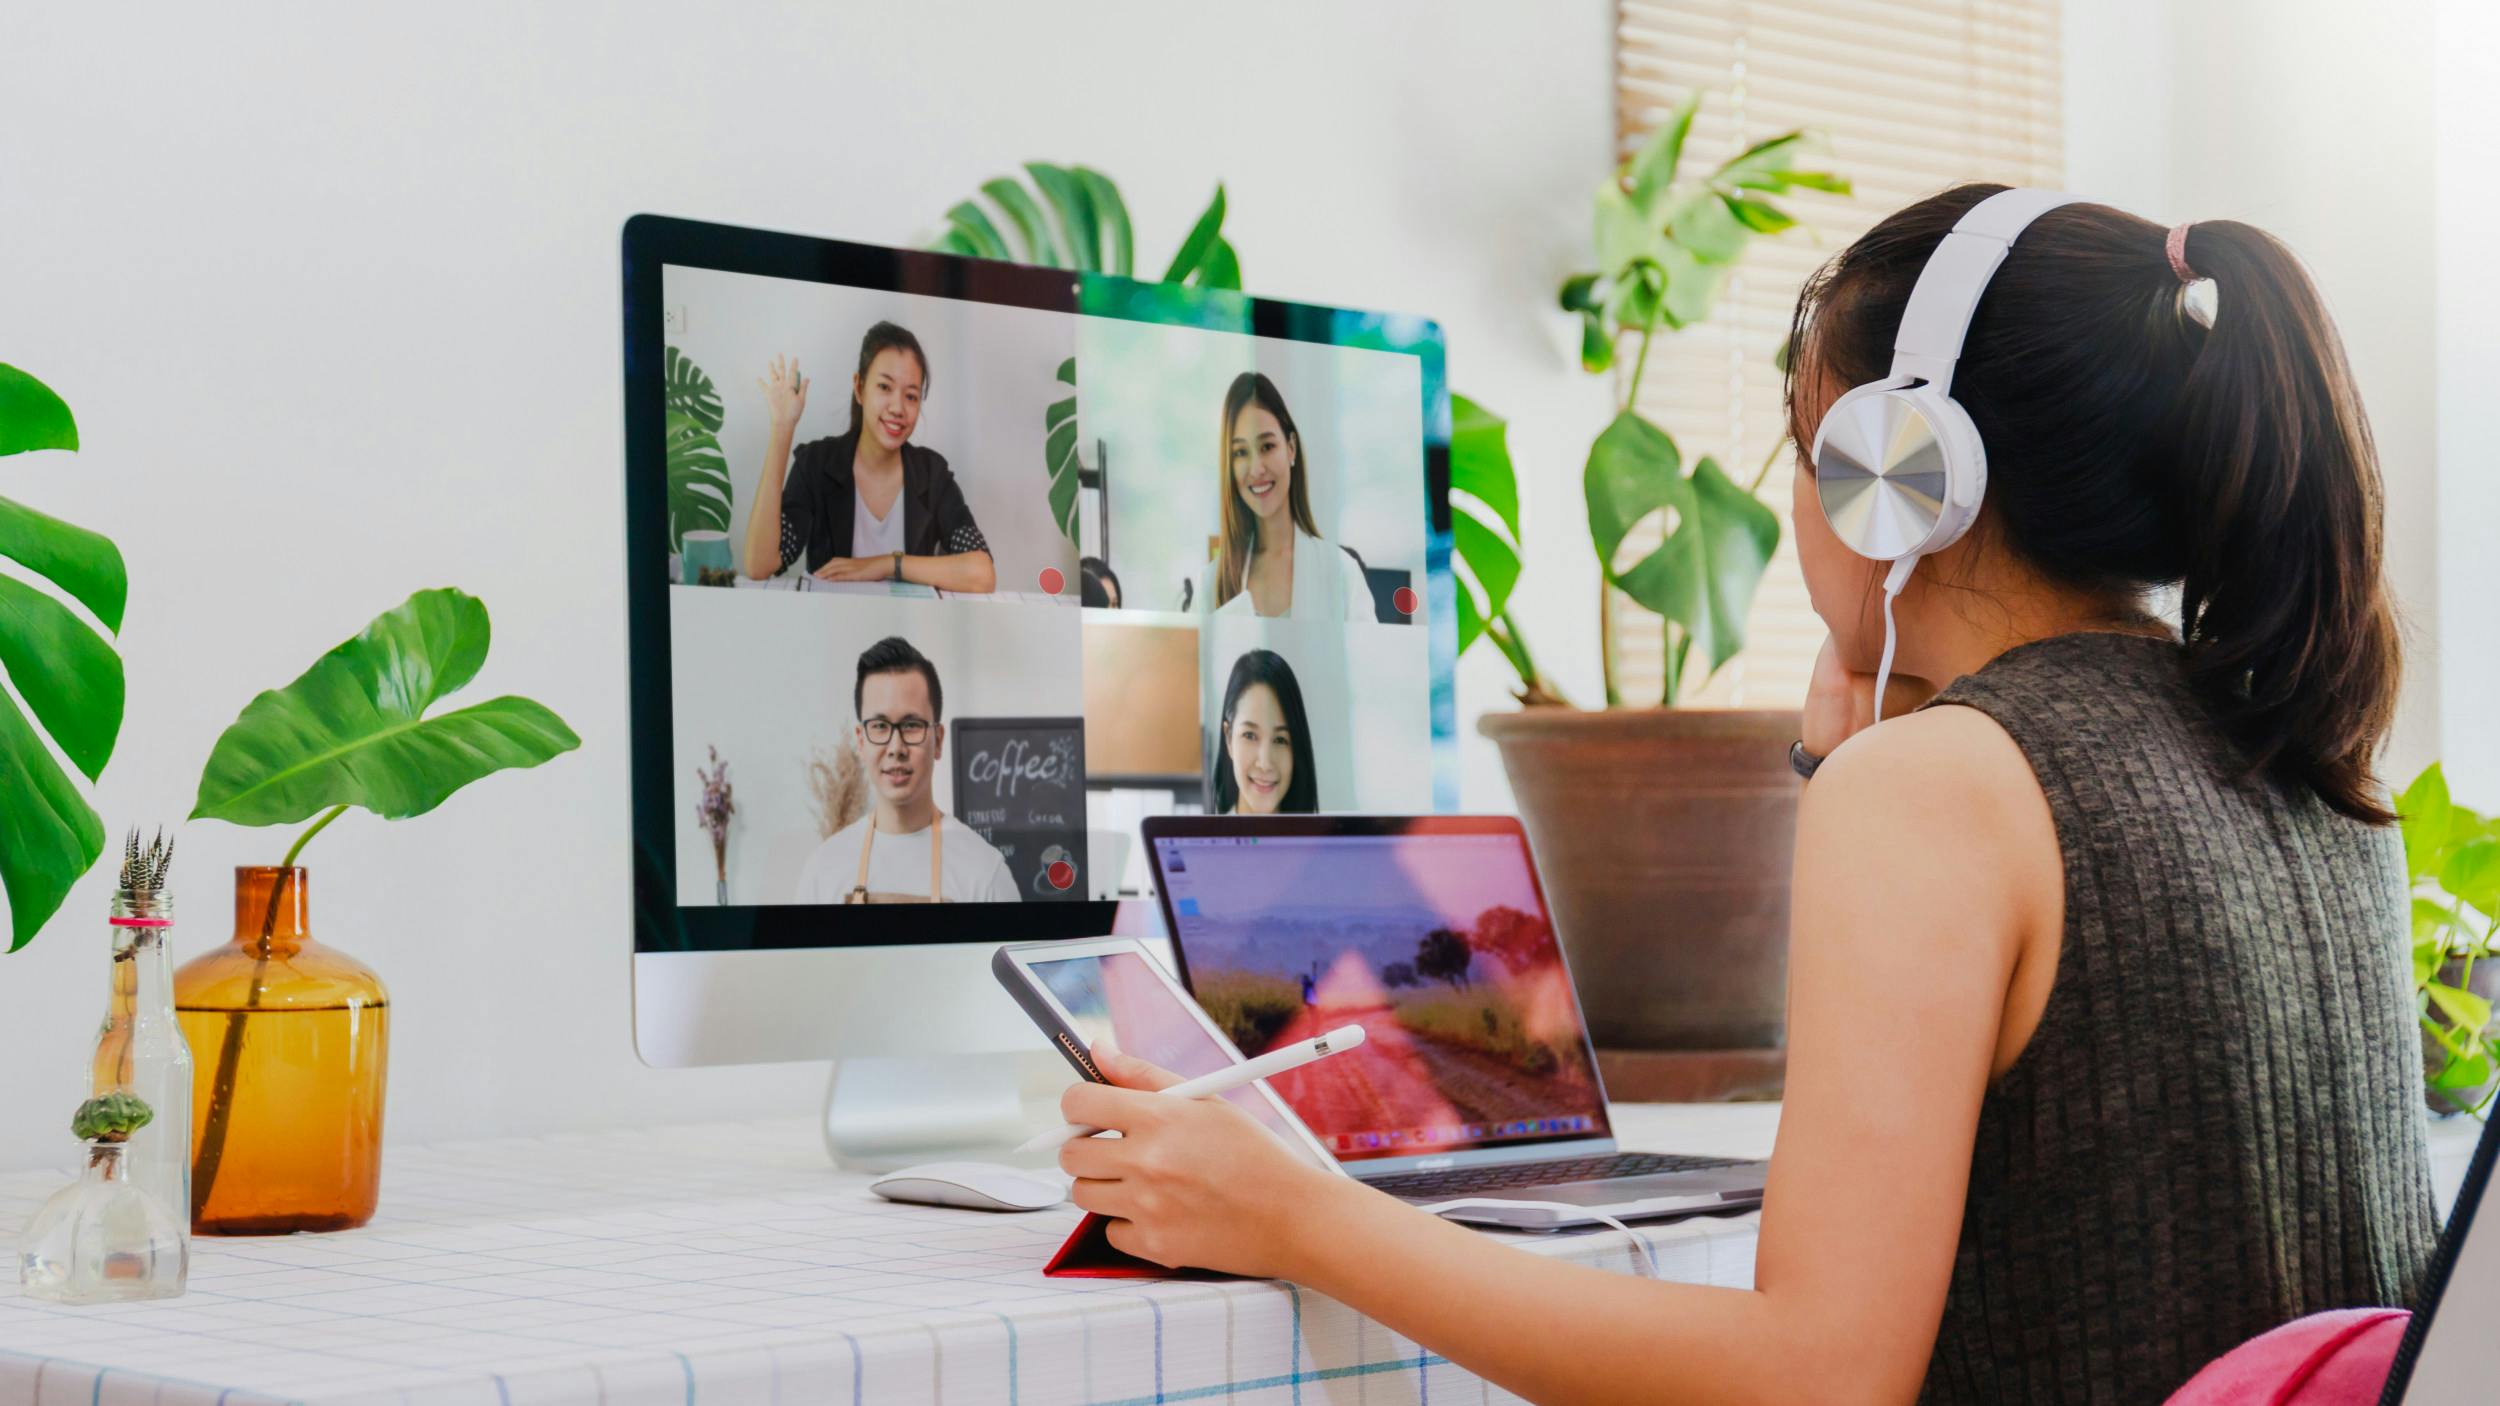 Video Presentation and the Modern Work Environment